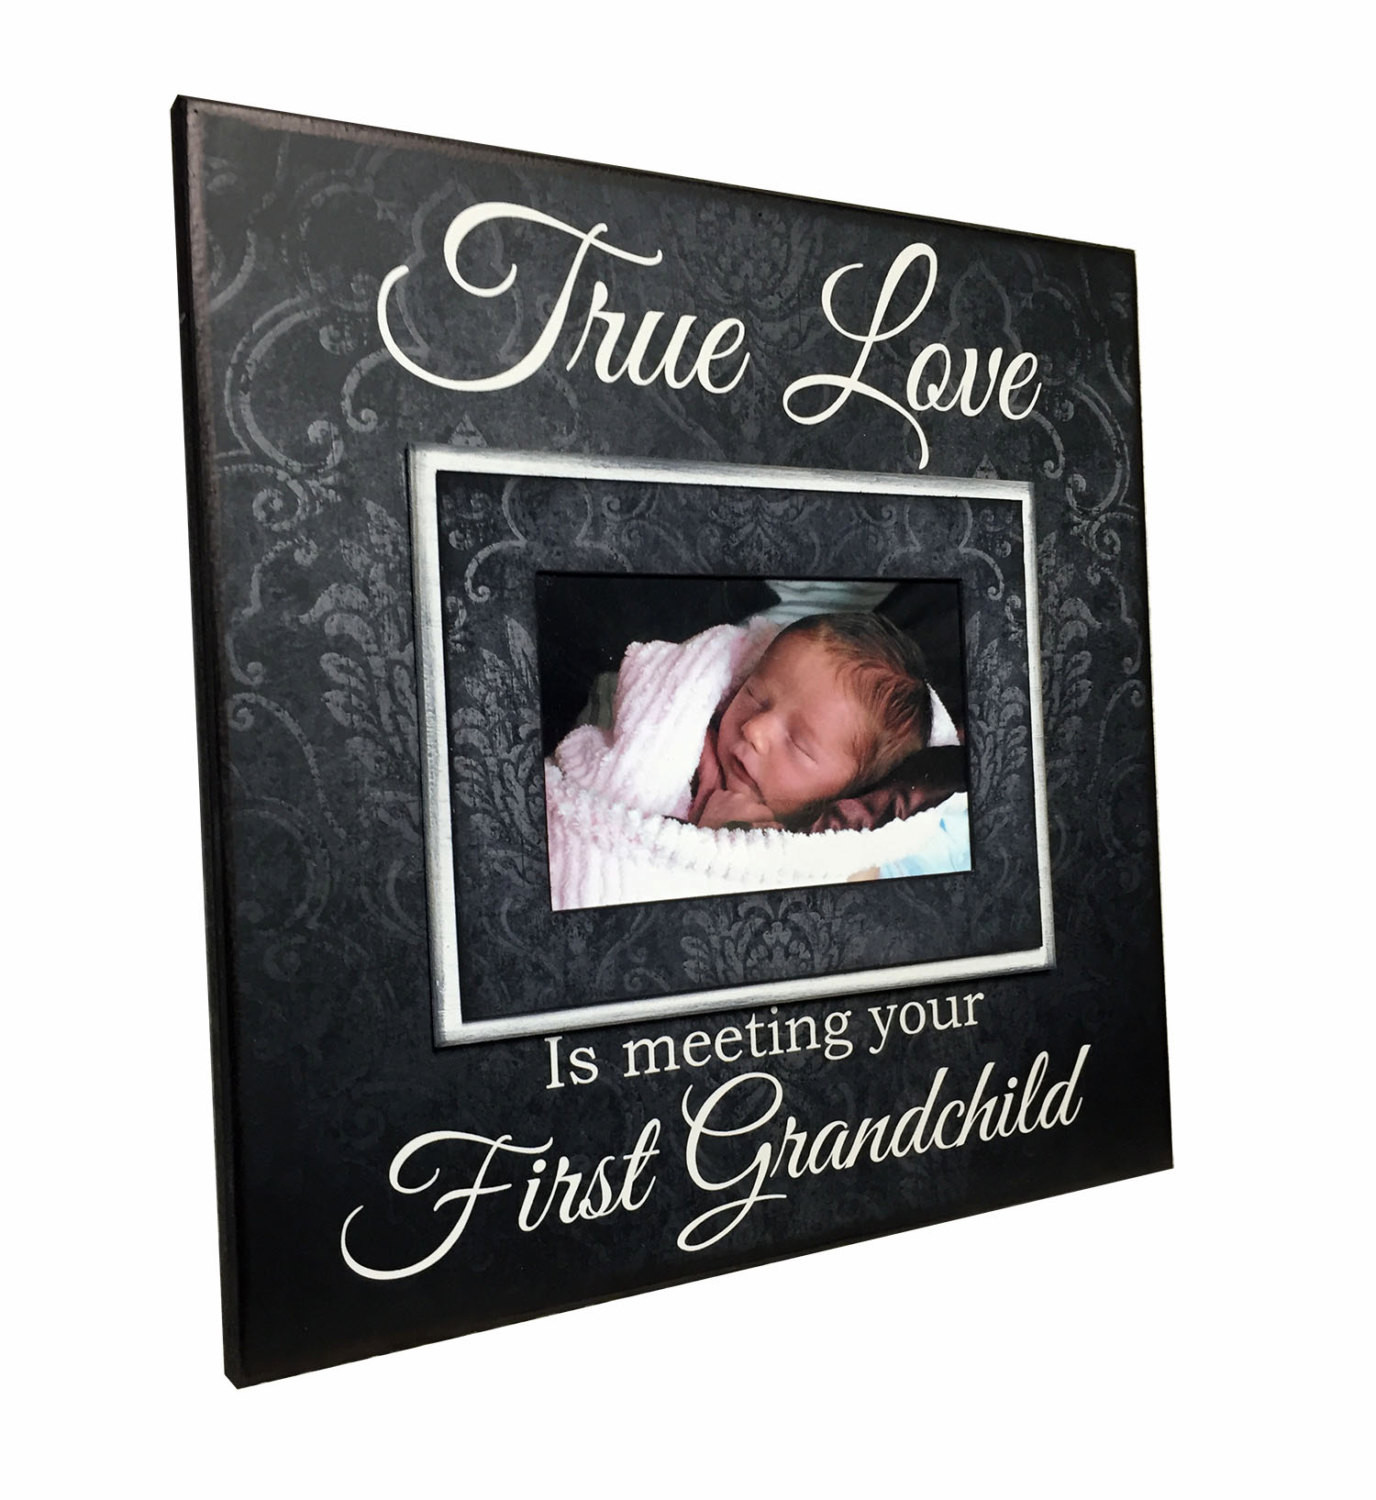 New Grandmother Gift Ideas
 New Grandparent Gift Picture Frame For Grandmother